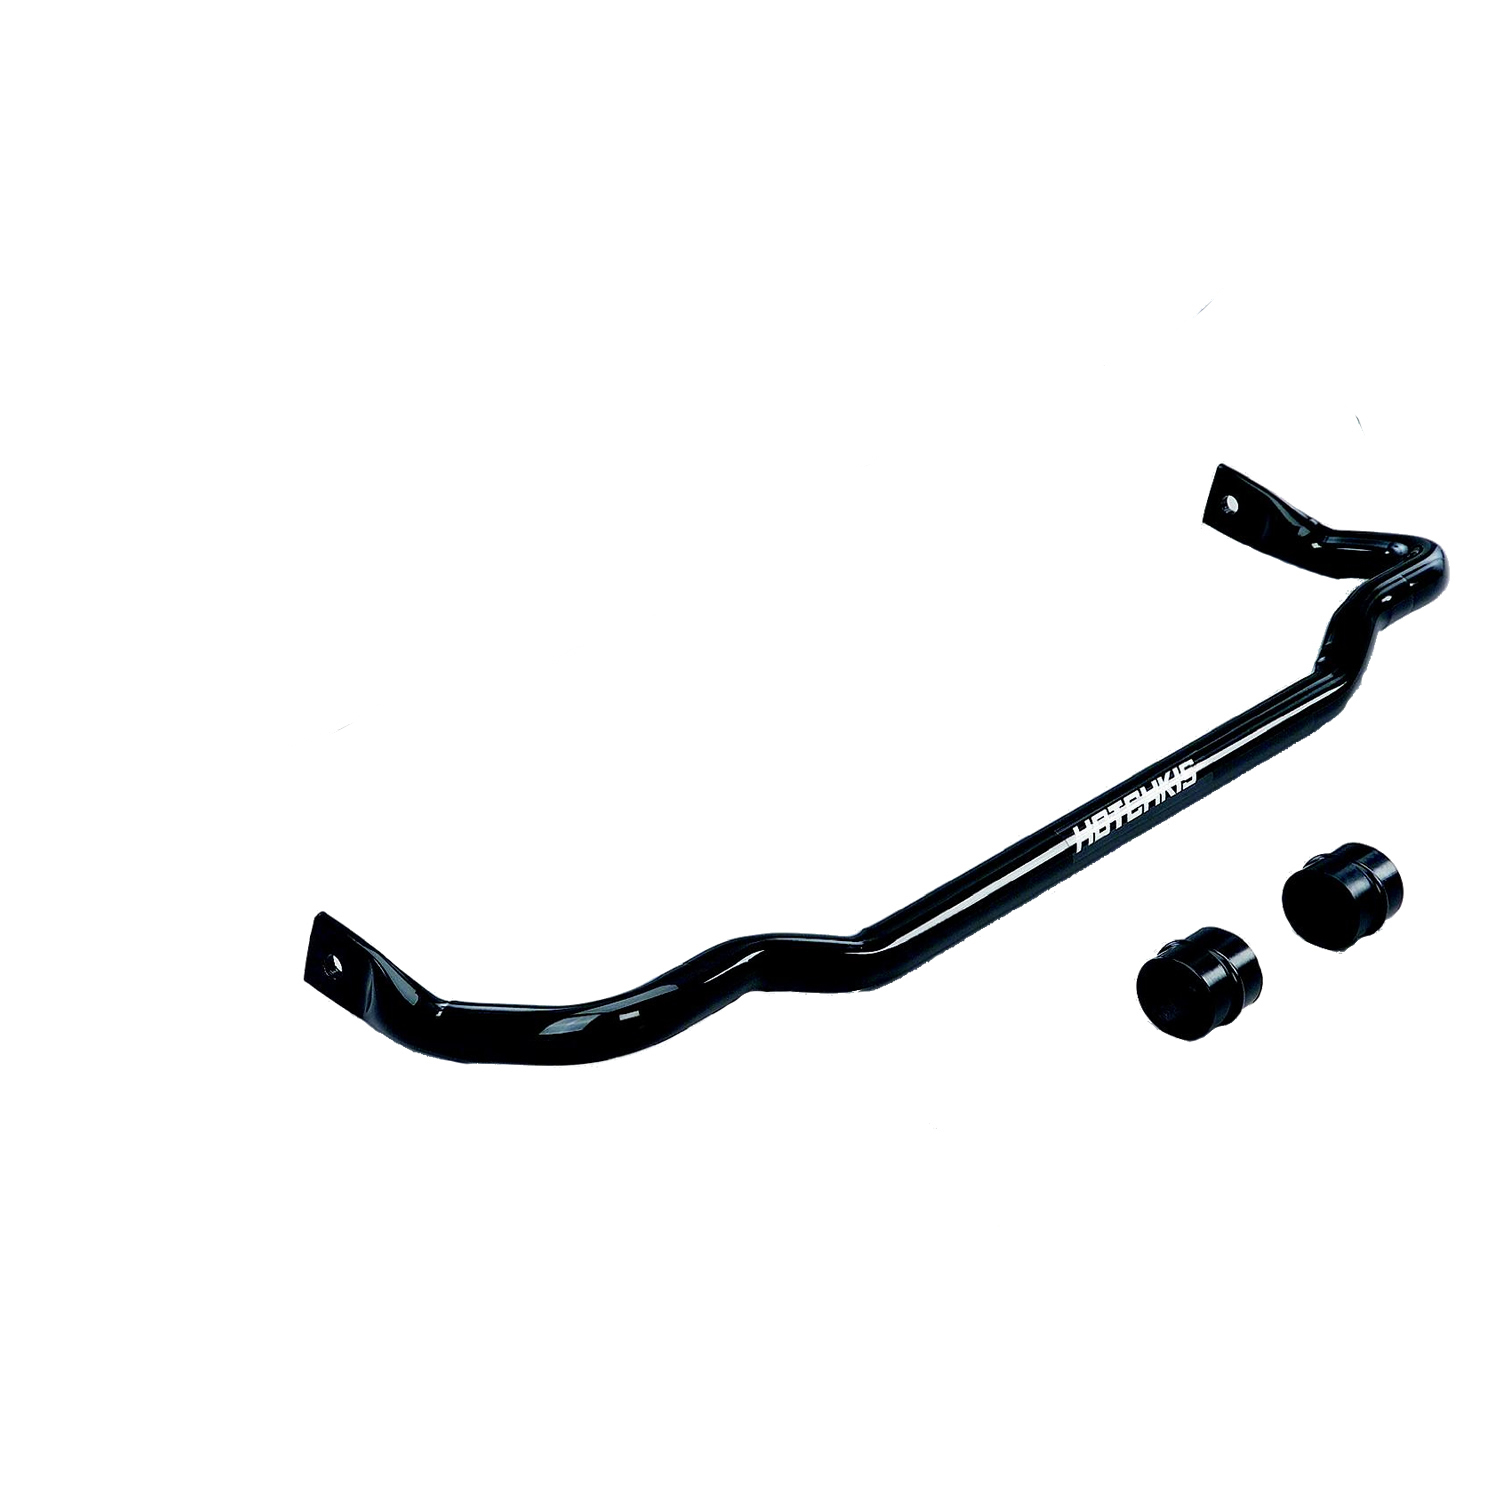 2013+ Dodge Challenger Front Sway Bar Set from Hotchkis Sport Suspension